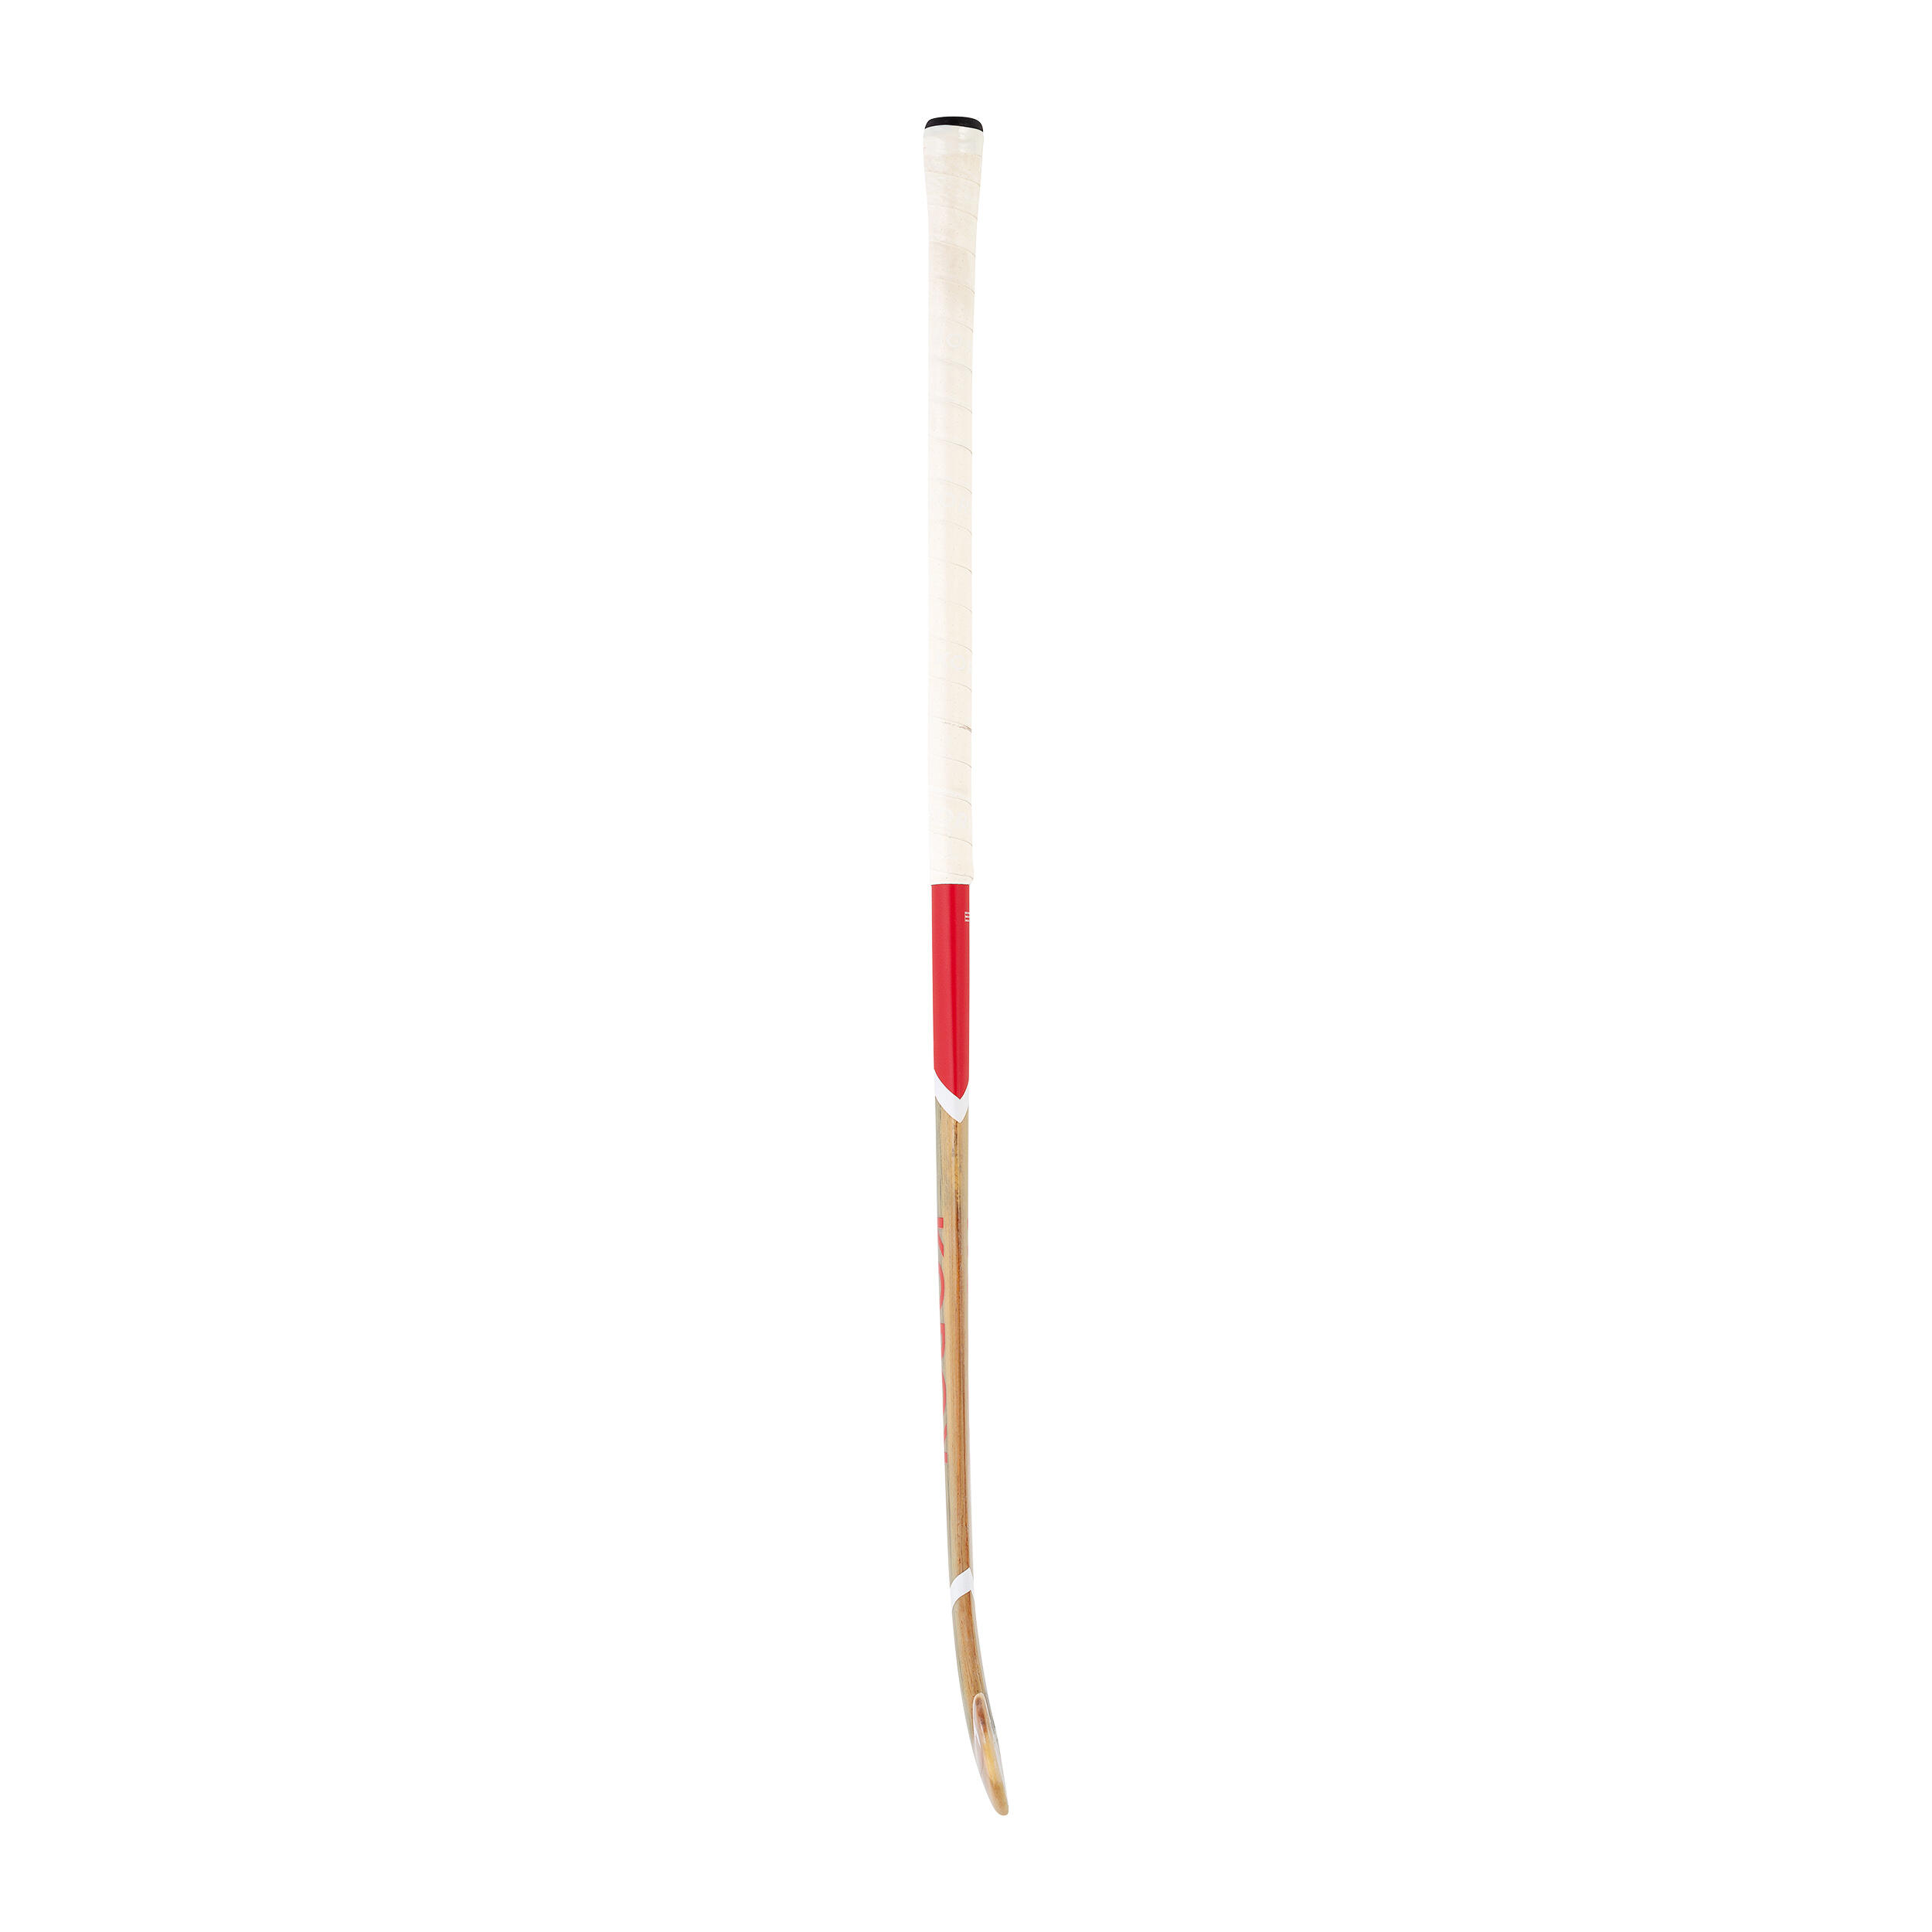 Adult Advanced Wood and 30% Carbon Low Bow Indoor Hockey Stick FH930W - Wood/Red 8/8